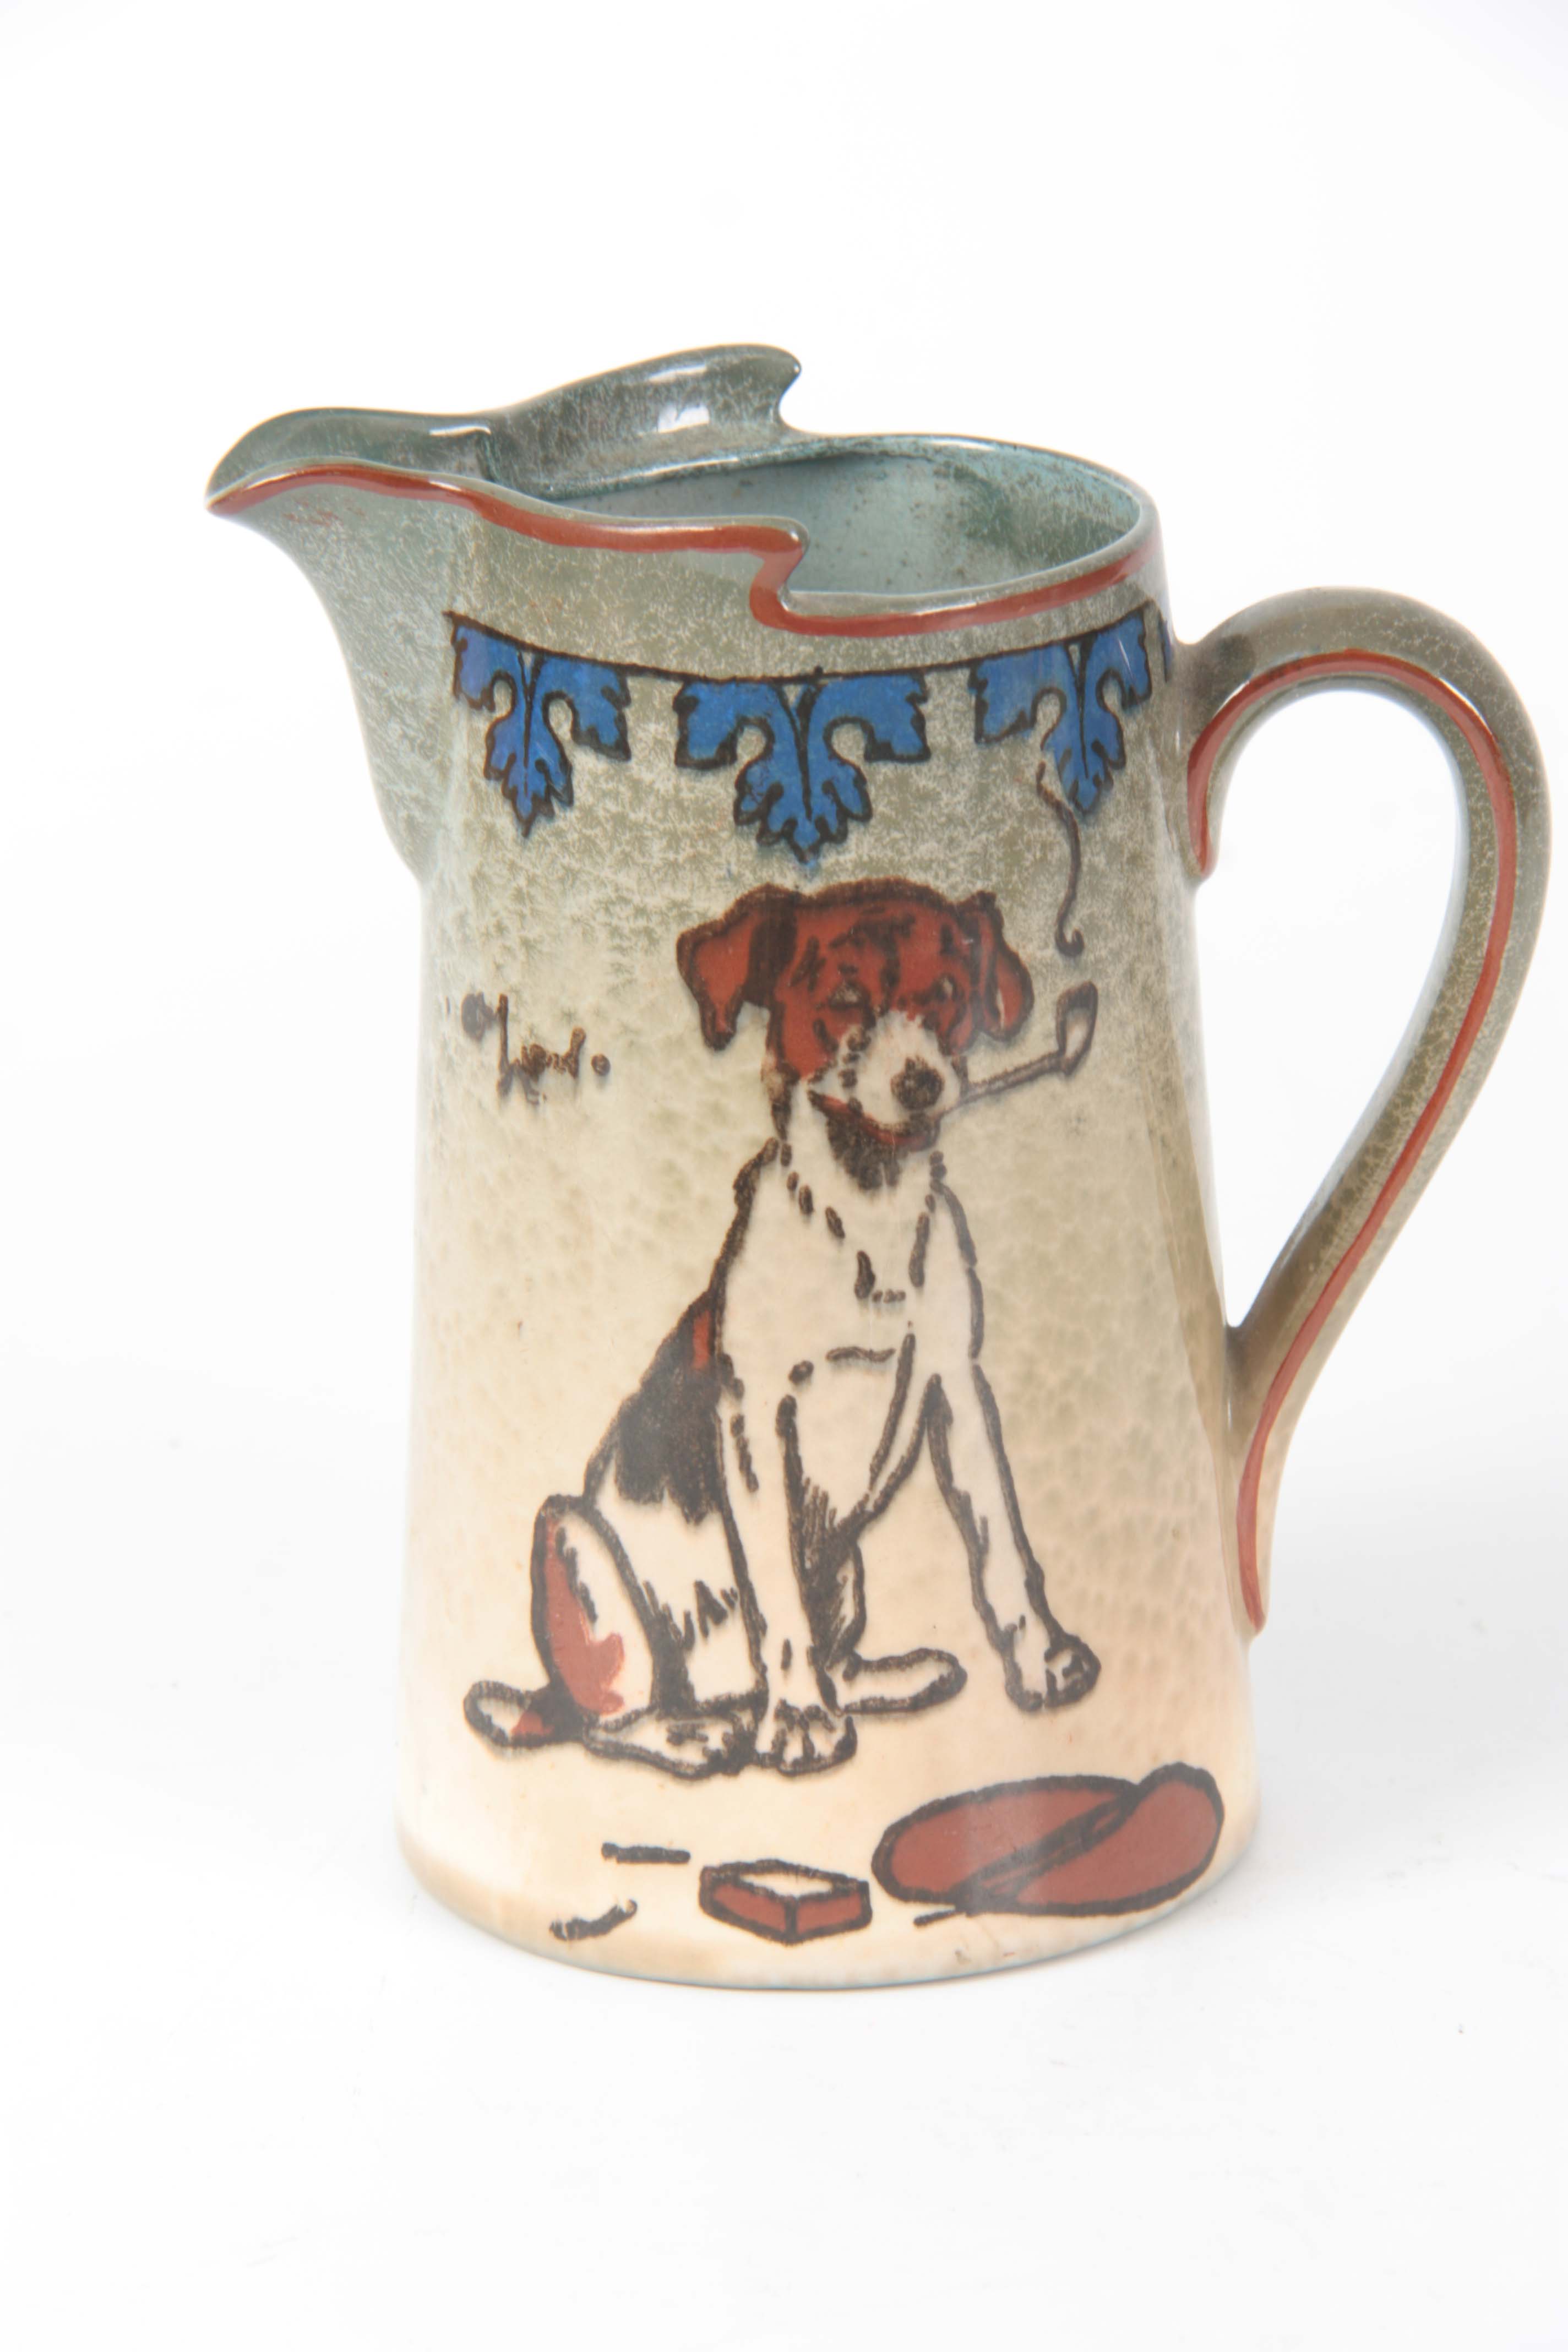 A CECIL ALDIN ROYAL DOULTON HUNTING JUG decorated with hounds and foxes mask 16.5cm high - Image 4 of 7